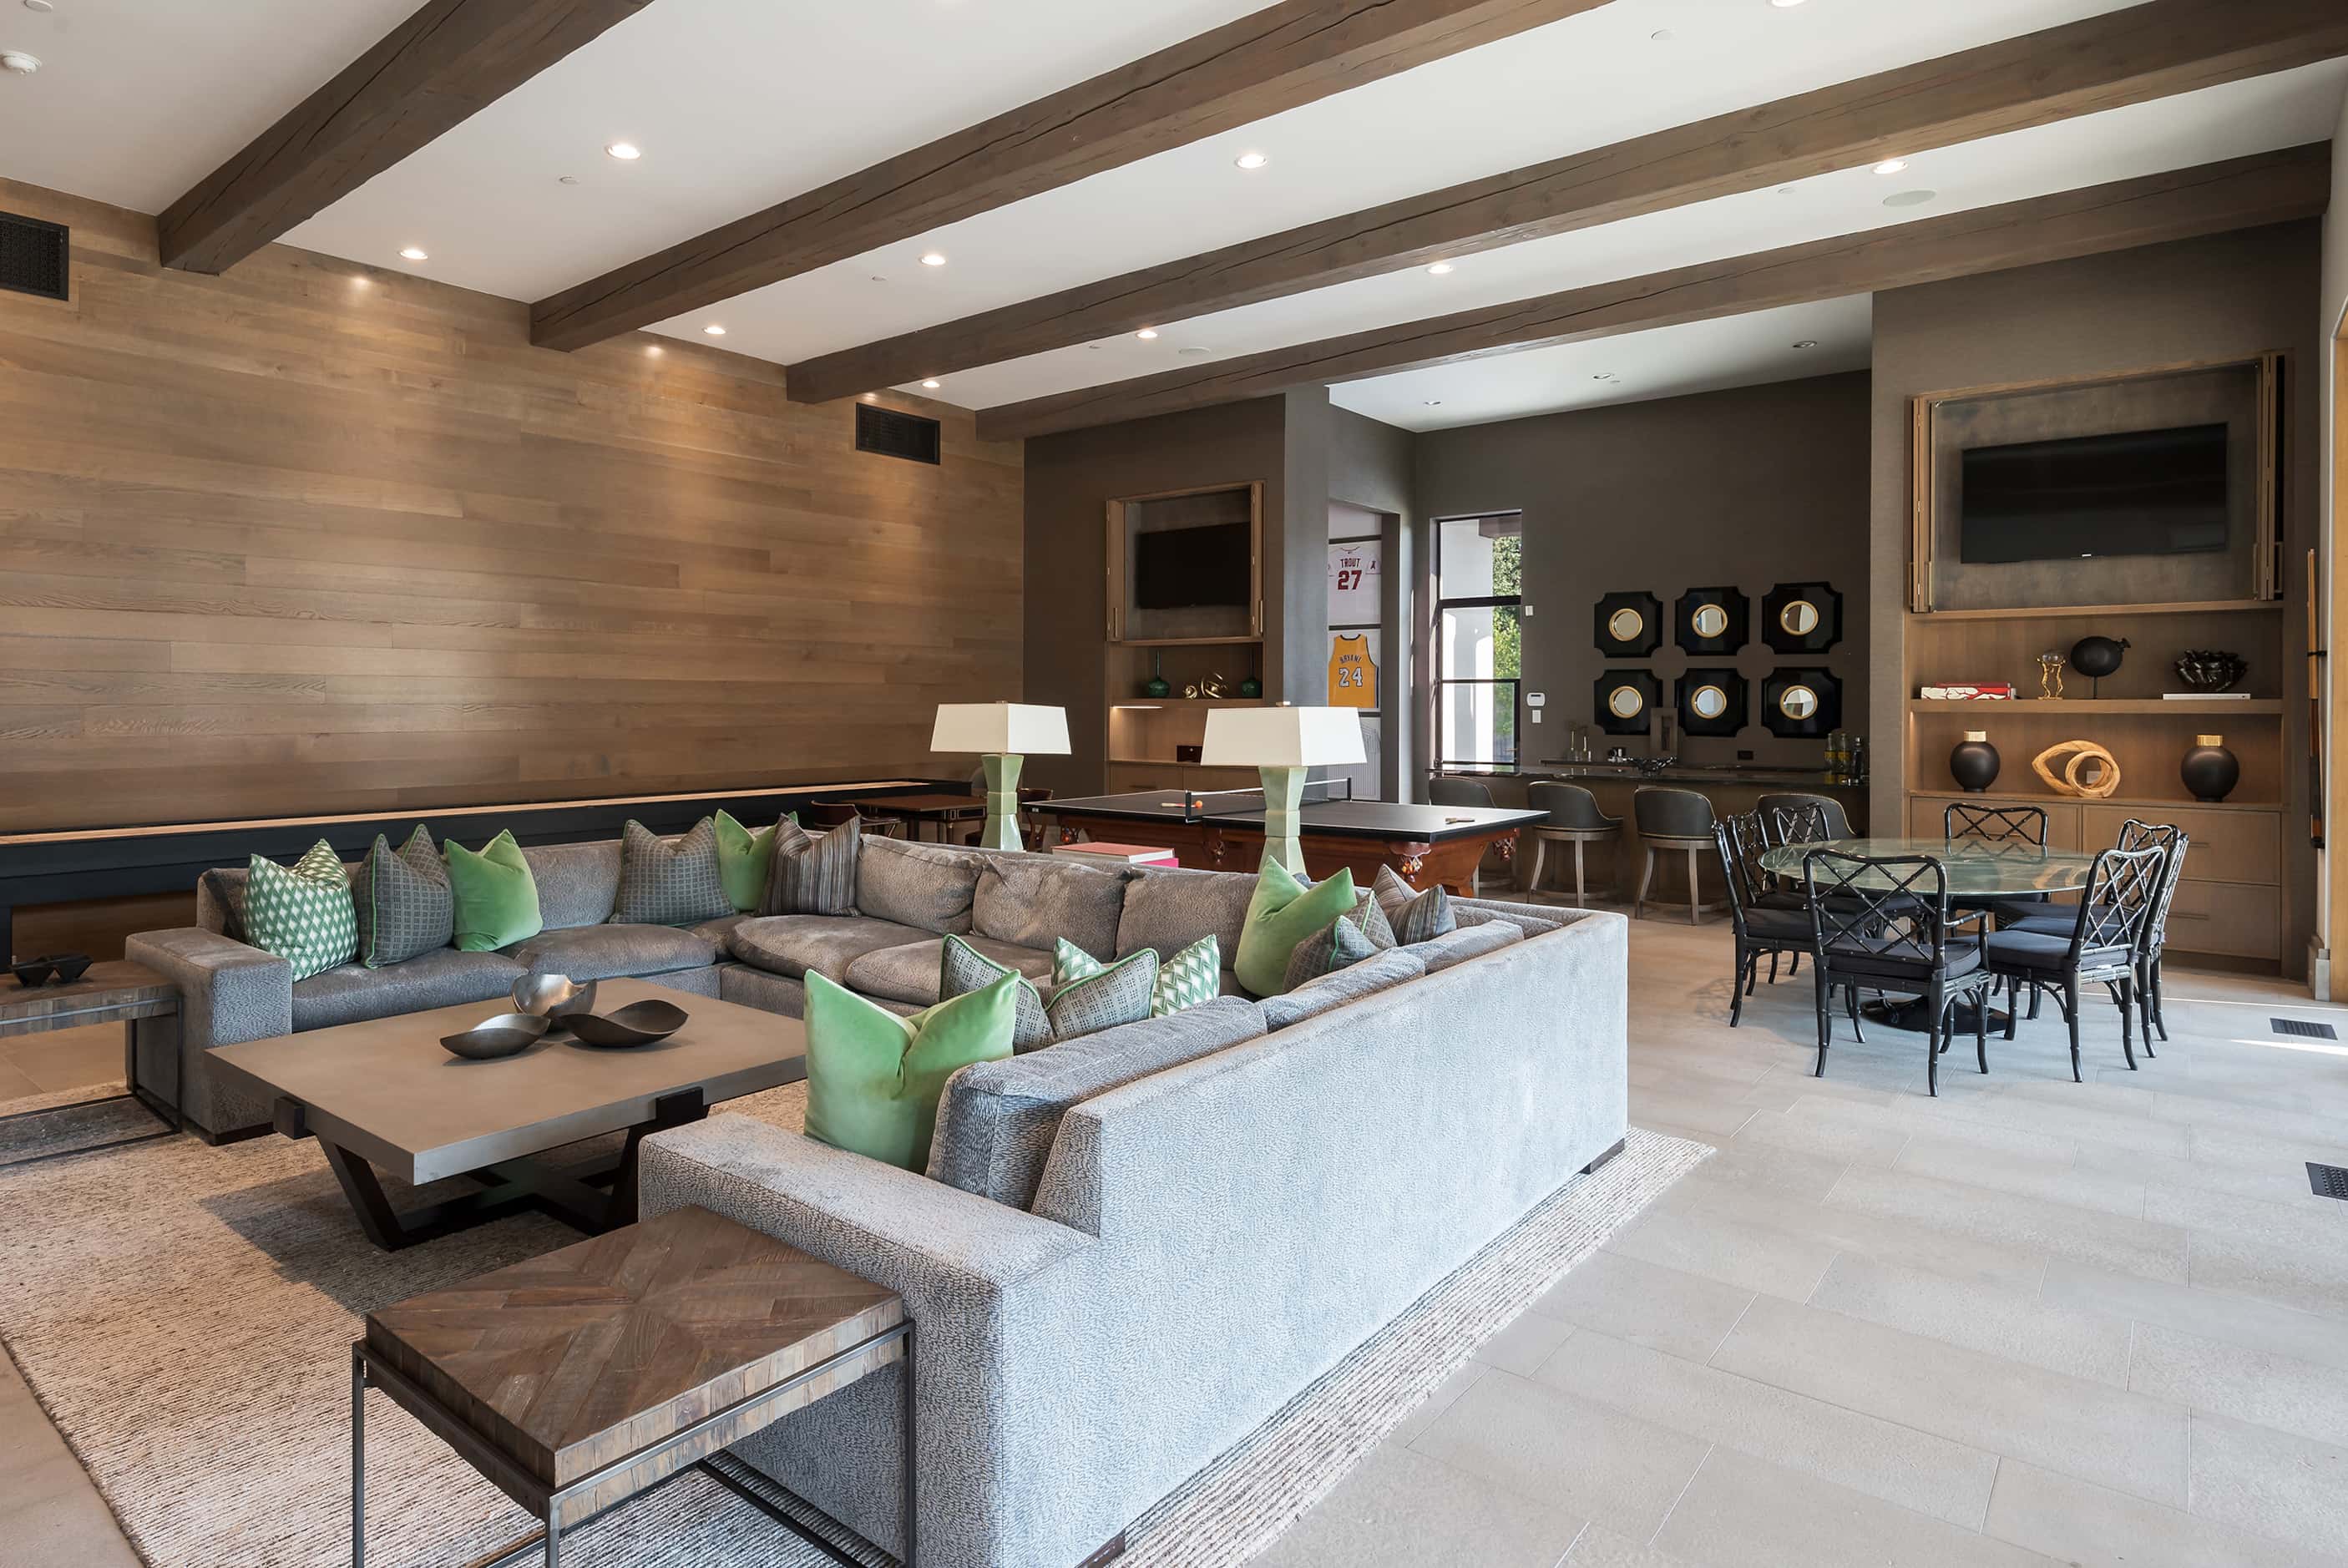 A game room has a U-shaped sofa, multiple game tables and a wet bar in the background.